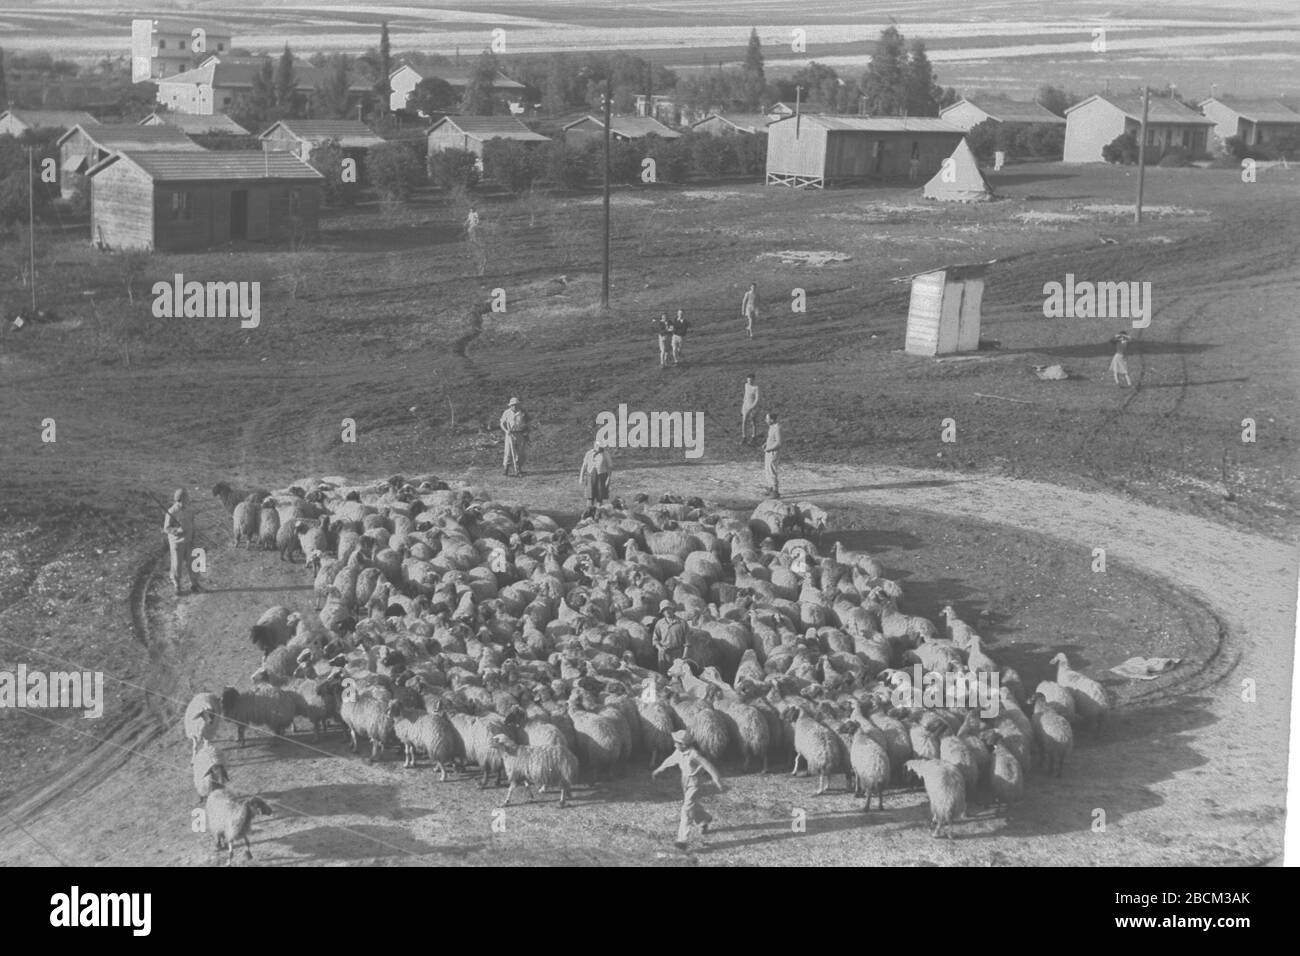 English Shepherds Taking Their Flock To The Pasture At Kibbutz Sde Nahum I O E U I O U E U U E C I I C U Ss O E I C I I O I U E U Ss O N E U 01 06 1946 This Is